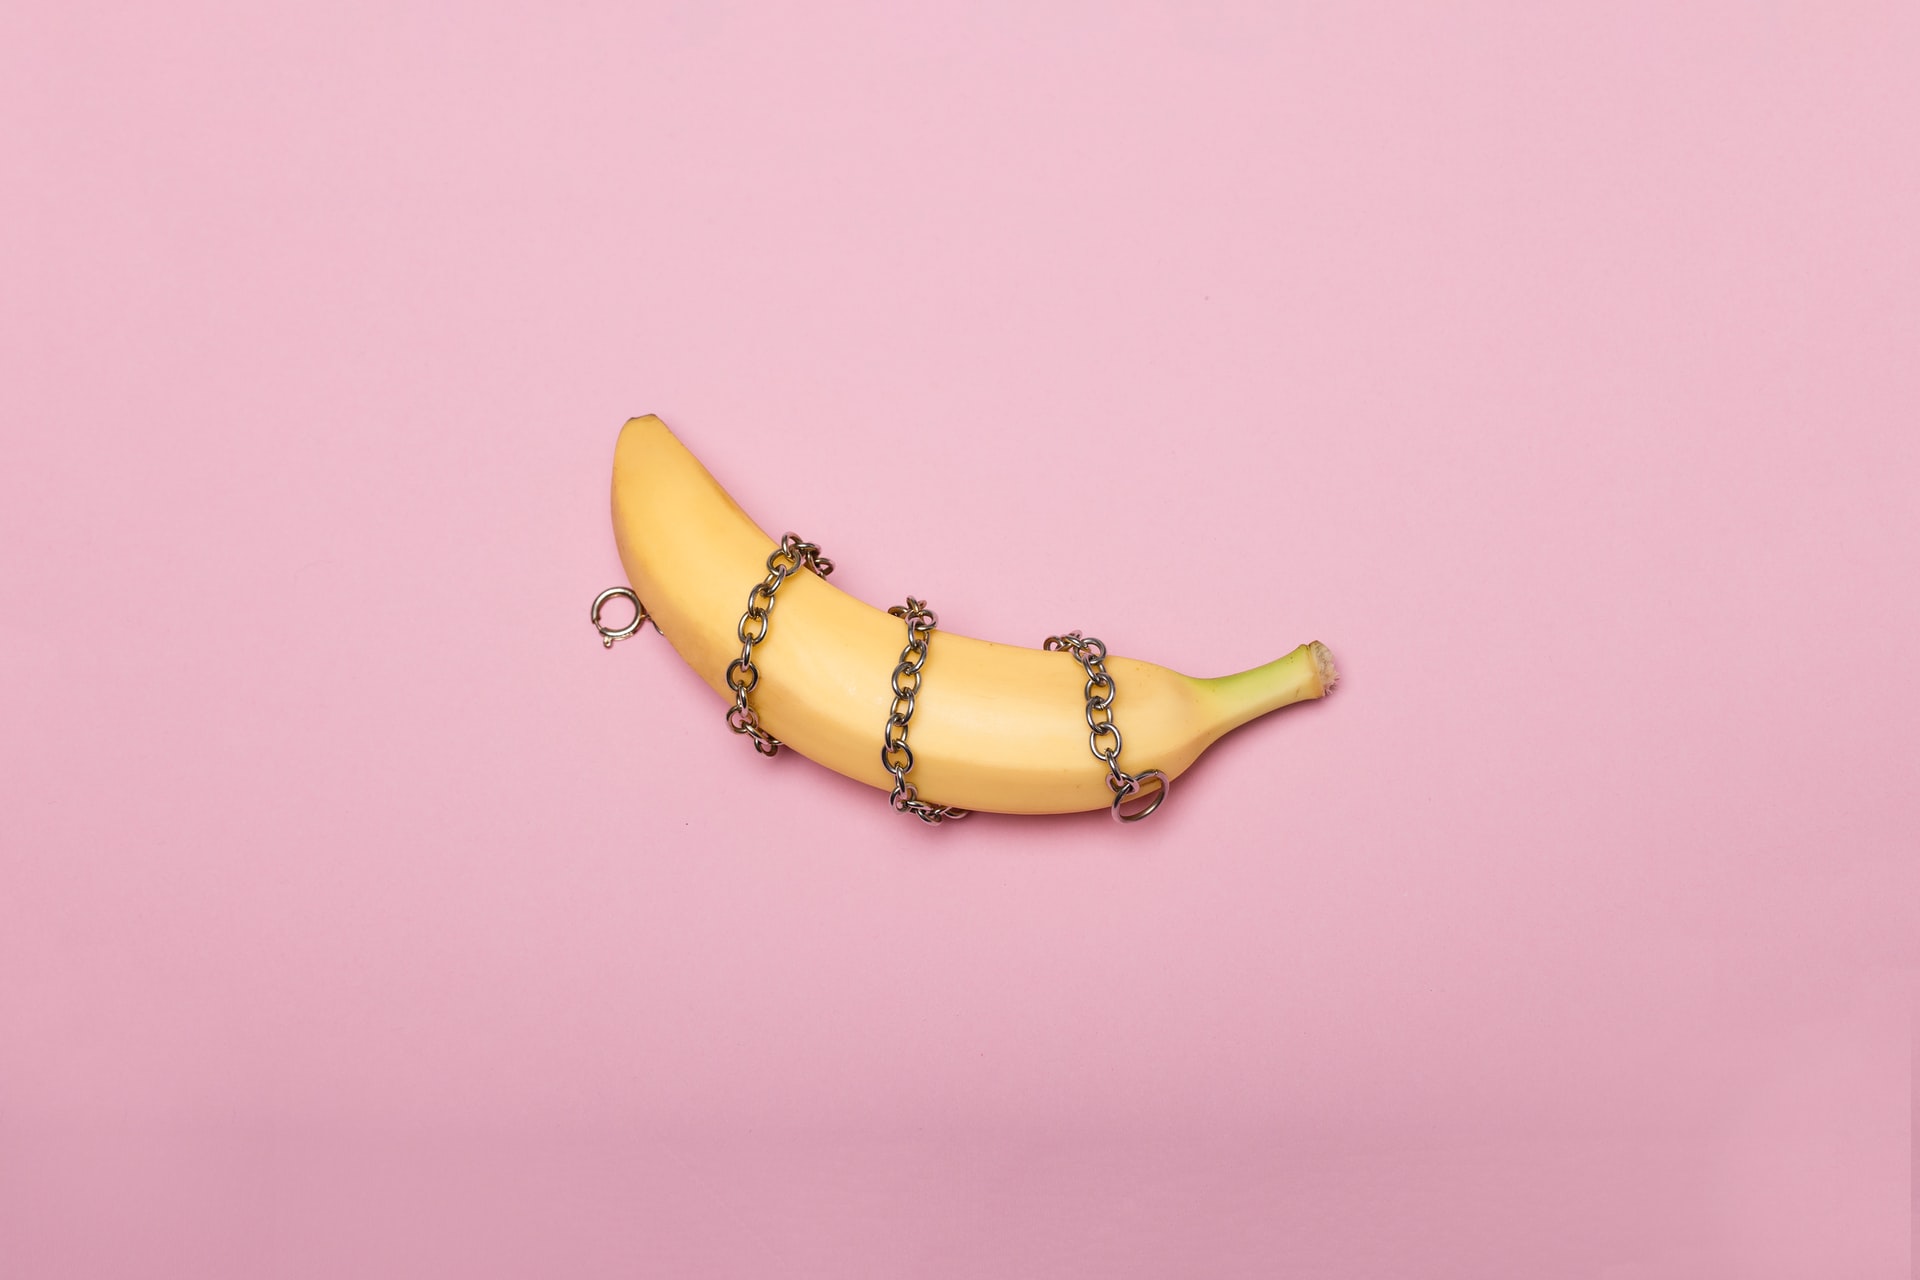 how-to-increase-sperm-count-banana-in-chains